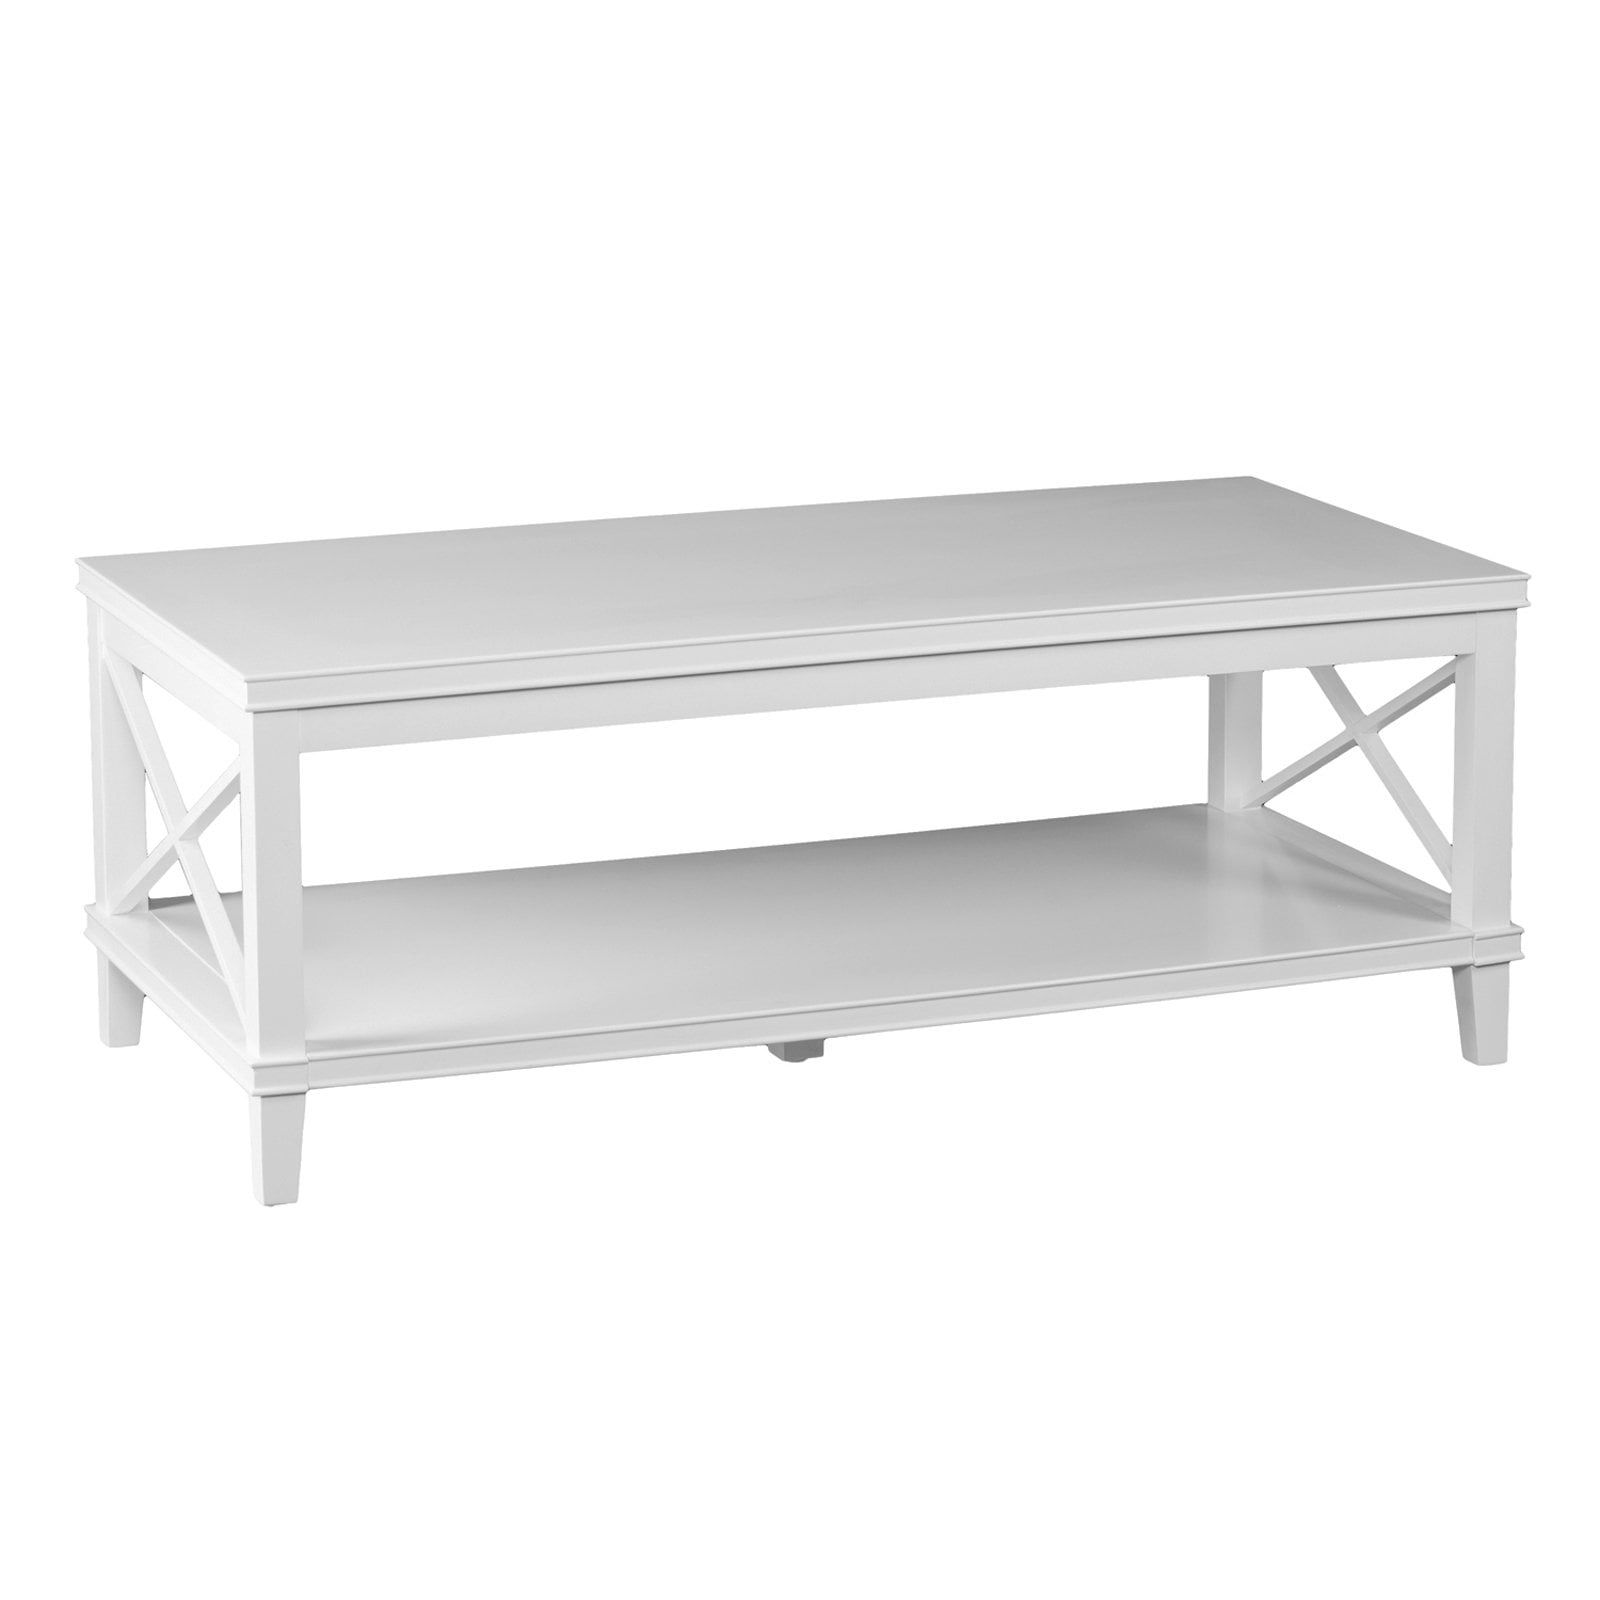 Southern Enterprises Larksmill Coffee Table – Walmart Throughout Southern Enterprises Larksmill Coffee Tables (Photo 3 of 5)